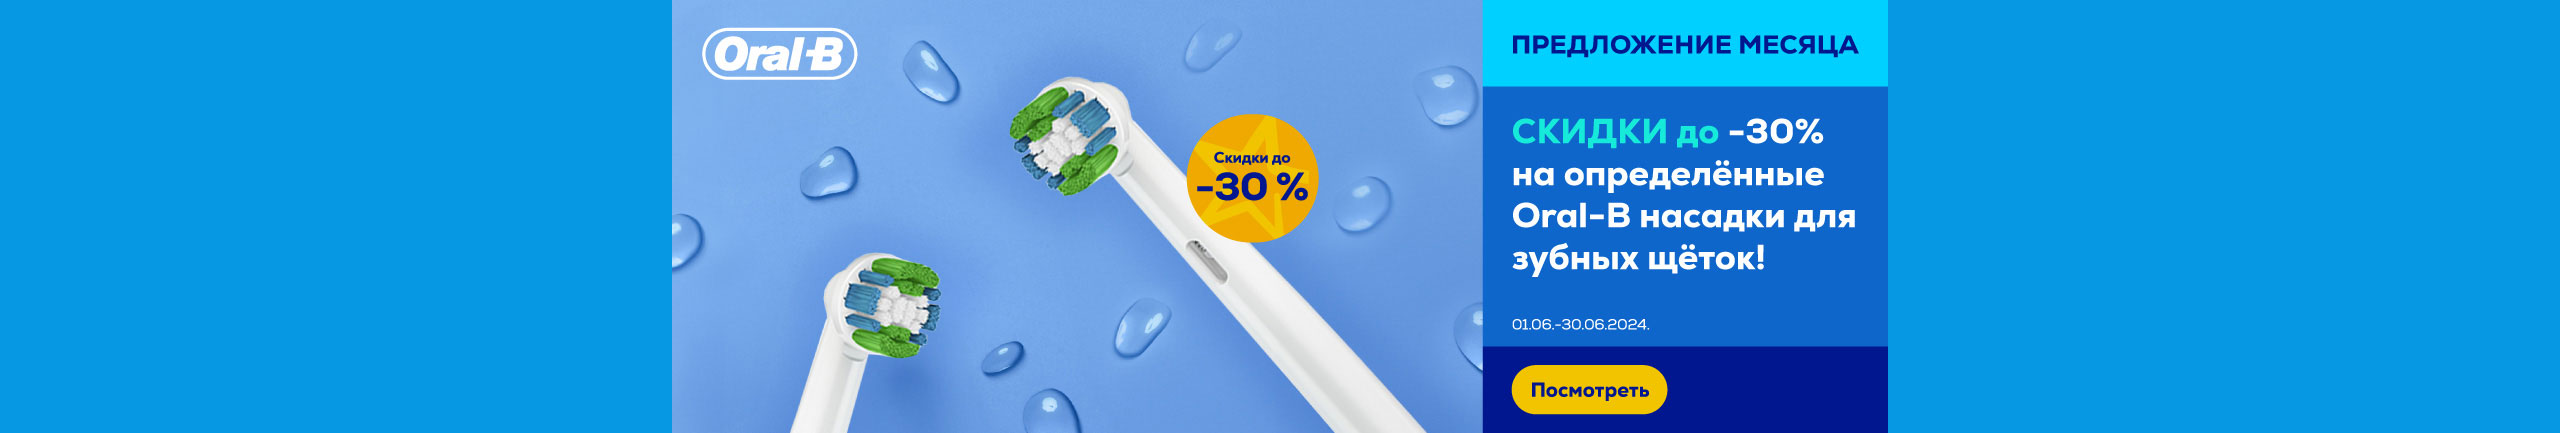 GR oralb tooth